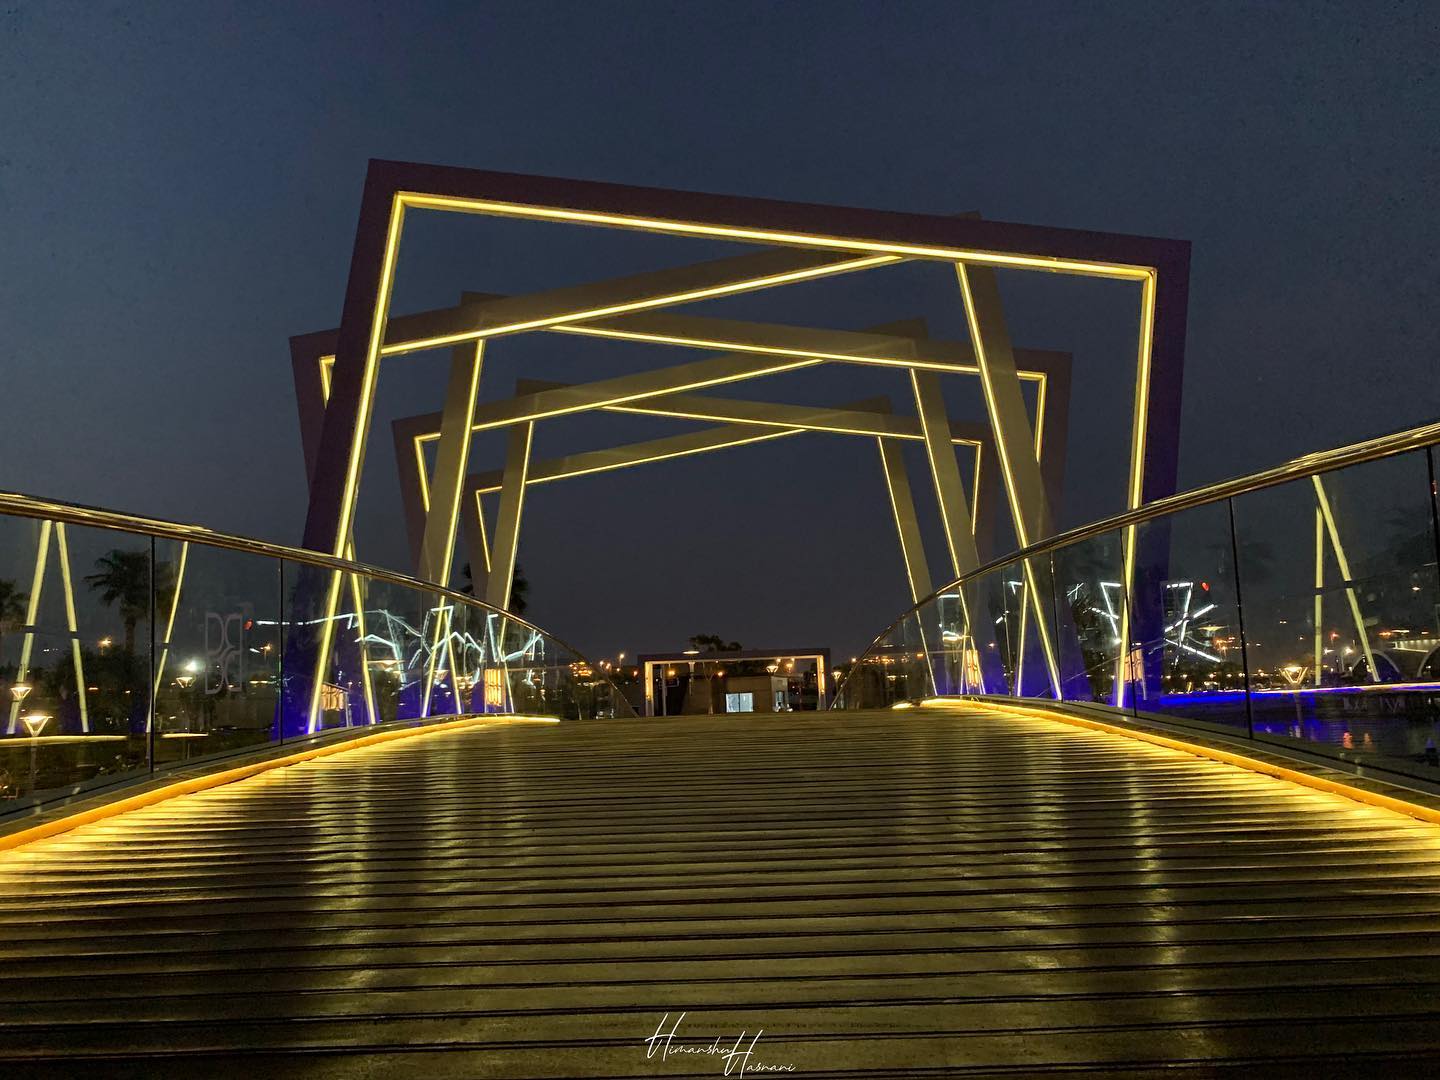 A picture is nothing but a bridge between the soul of the artist and that of the spectator.
.
.
.
.
.
.
.
.
.
.
.
.
#bridge #bahrain #travelphotography #city #arch #architecturephotography #architecture  #travel #street #raw_snap_wish2021 #photography #streetphotography #fotobahrain #landscapephotography #travelgram #picoftheday #instagood #likeforlike #buildings #w2gobh #naturelovers #bh  #op_h #wph #d_y_c_ #timeoutbahrain #mobile__photography___ #repostbahrain #photographersteam